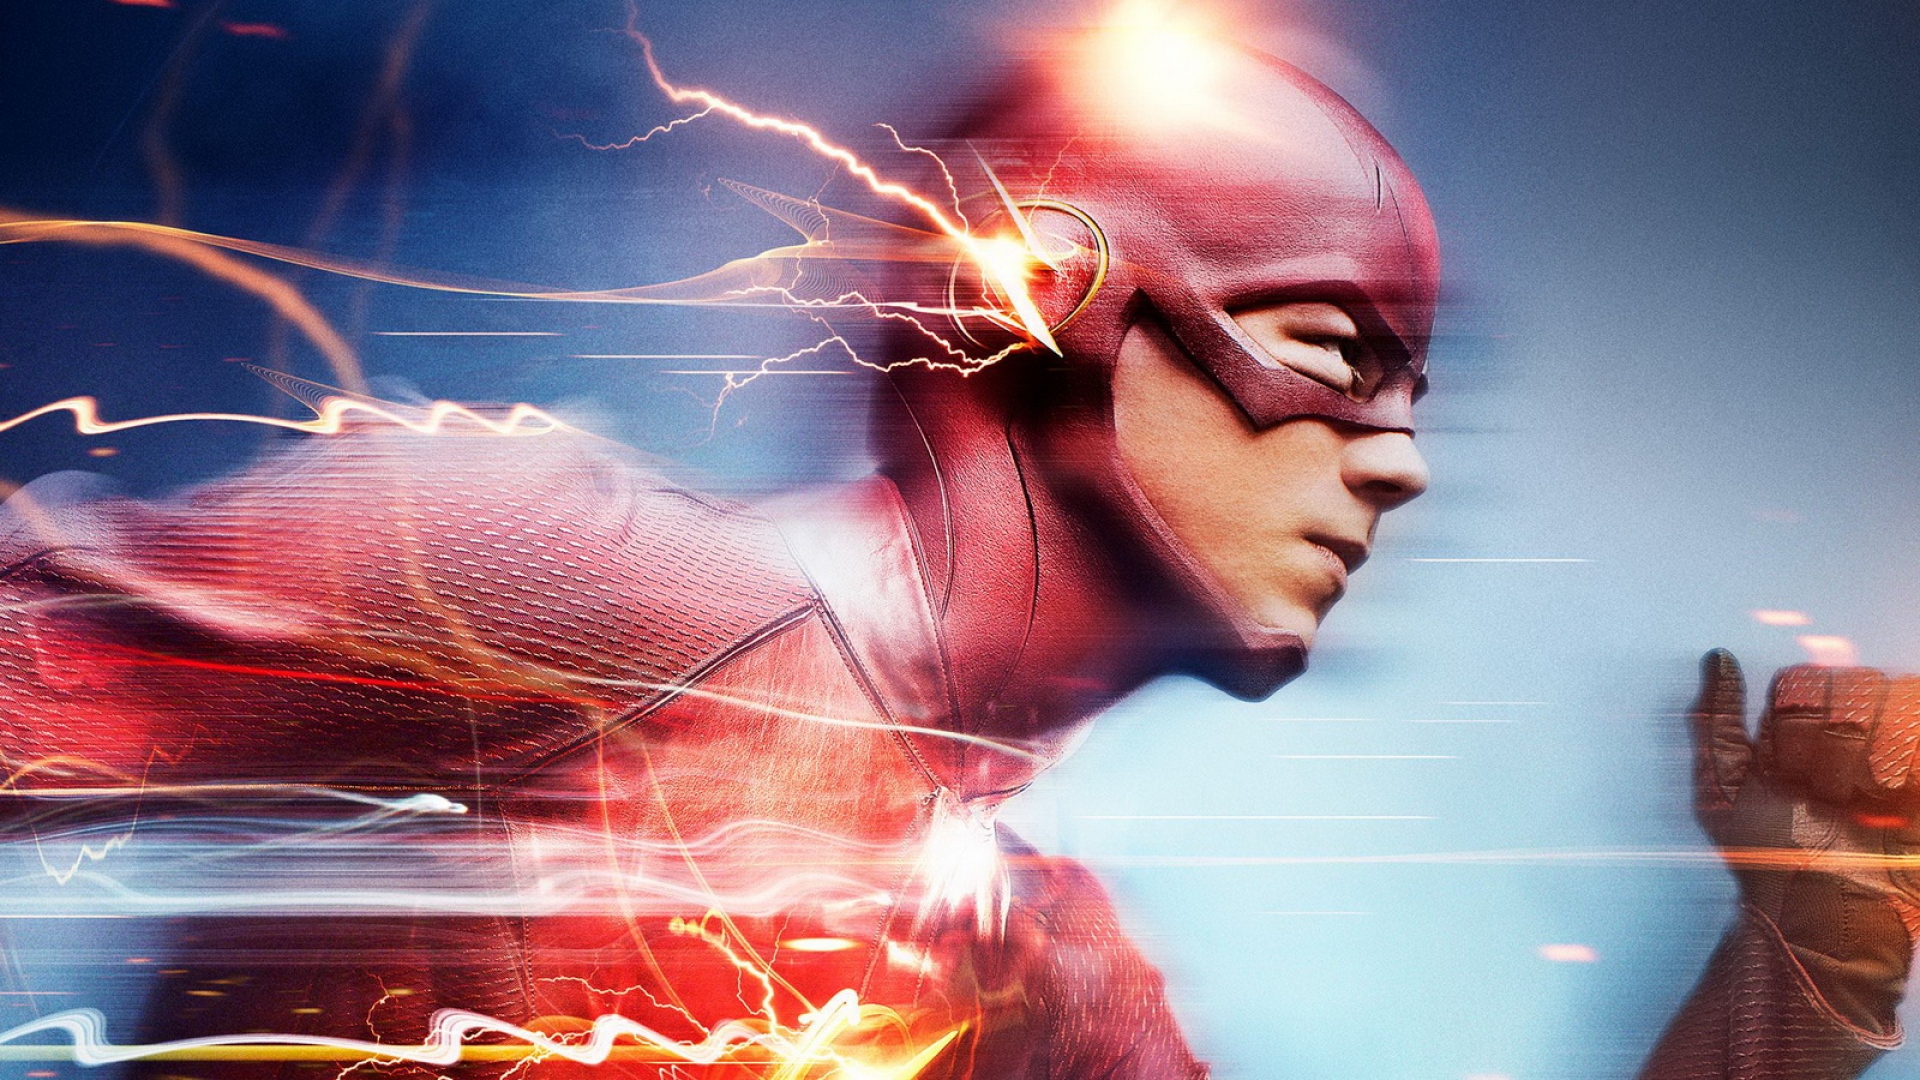 Photo For Flash Hd 2014 - Flash 1920 X 1080 , HD Wallpaper & Backgrounds